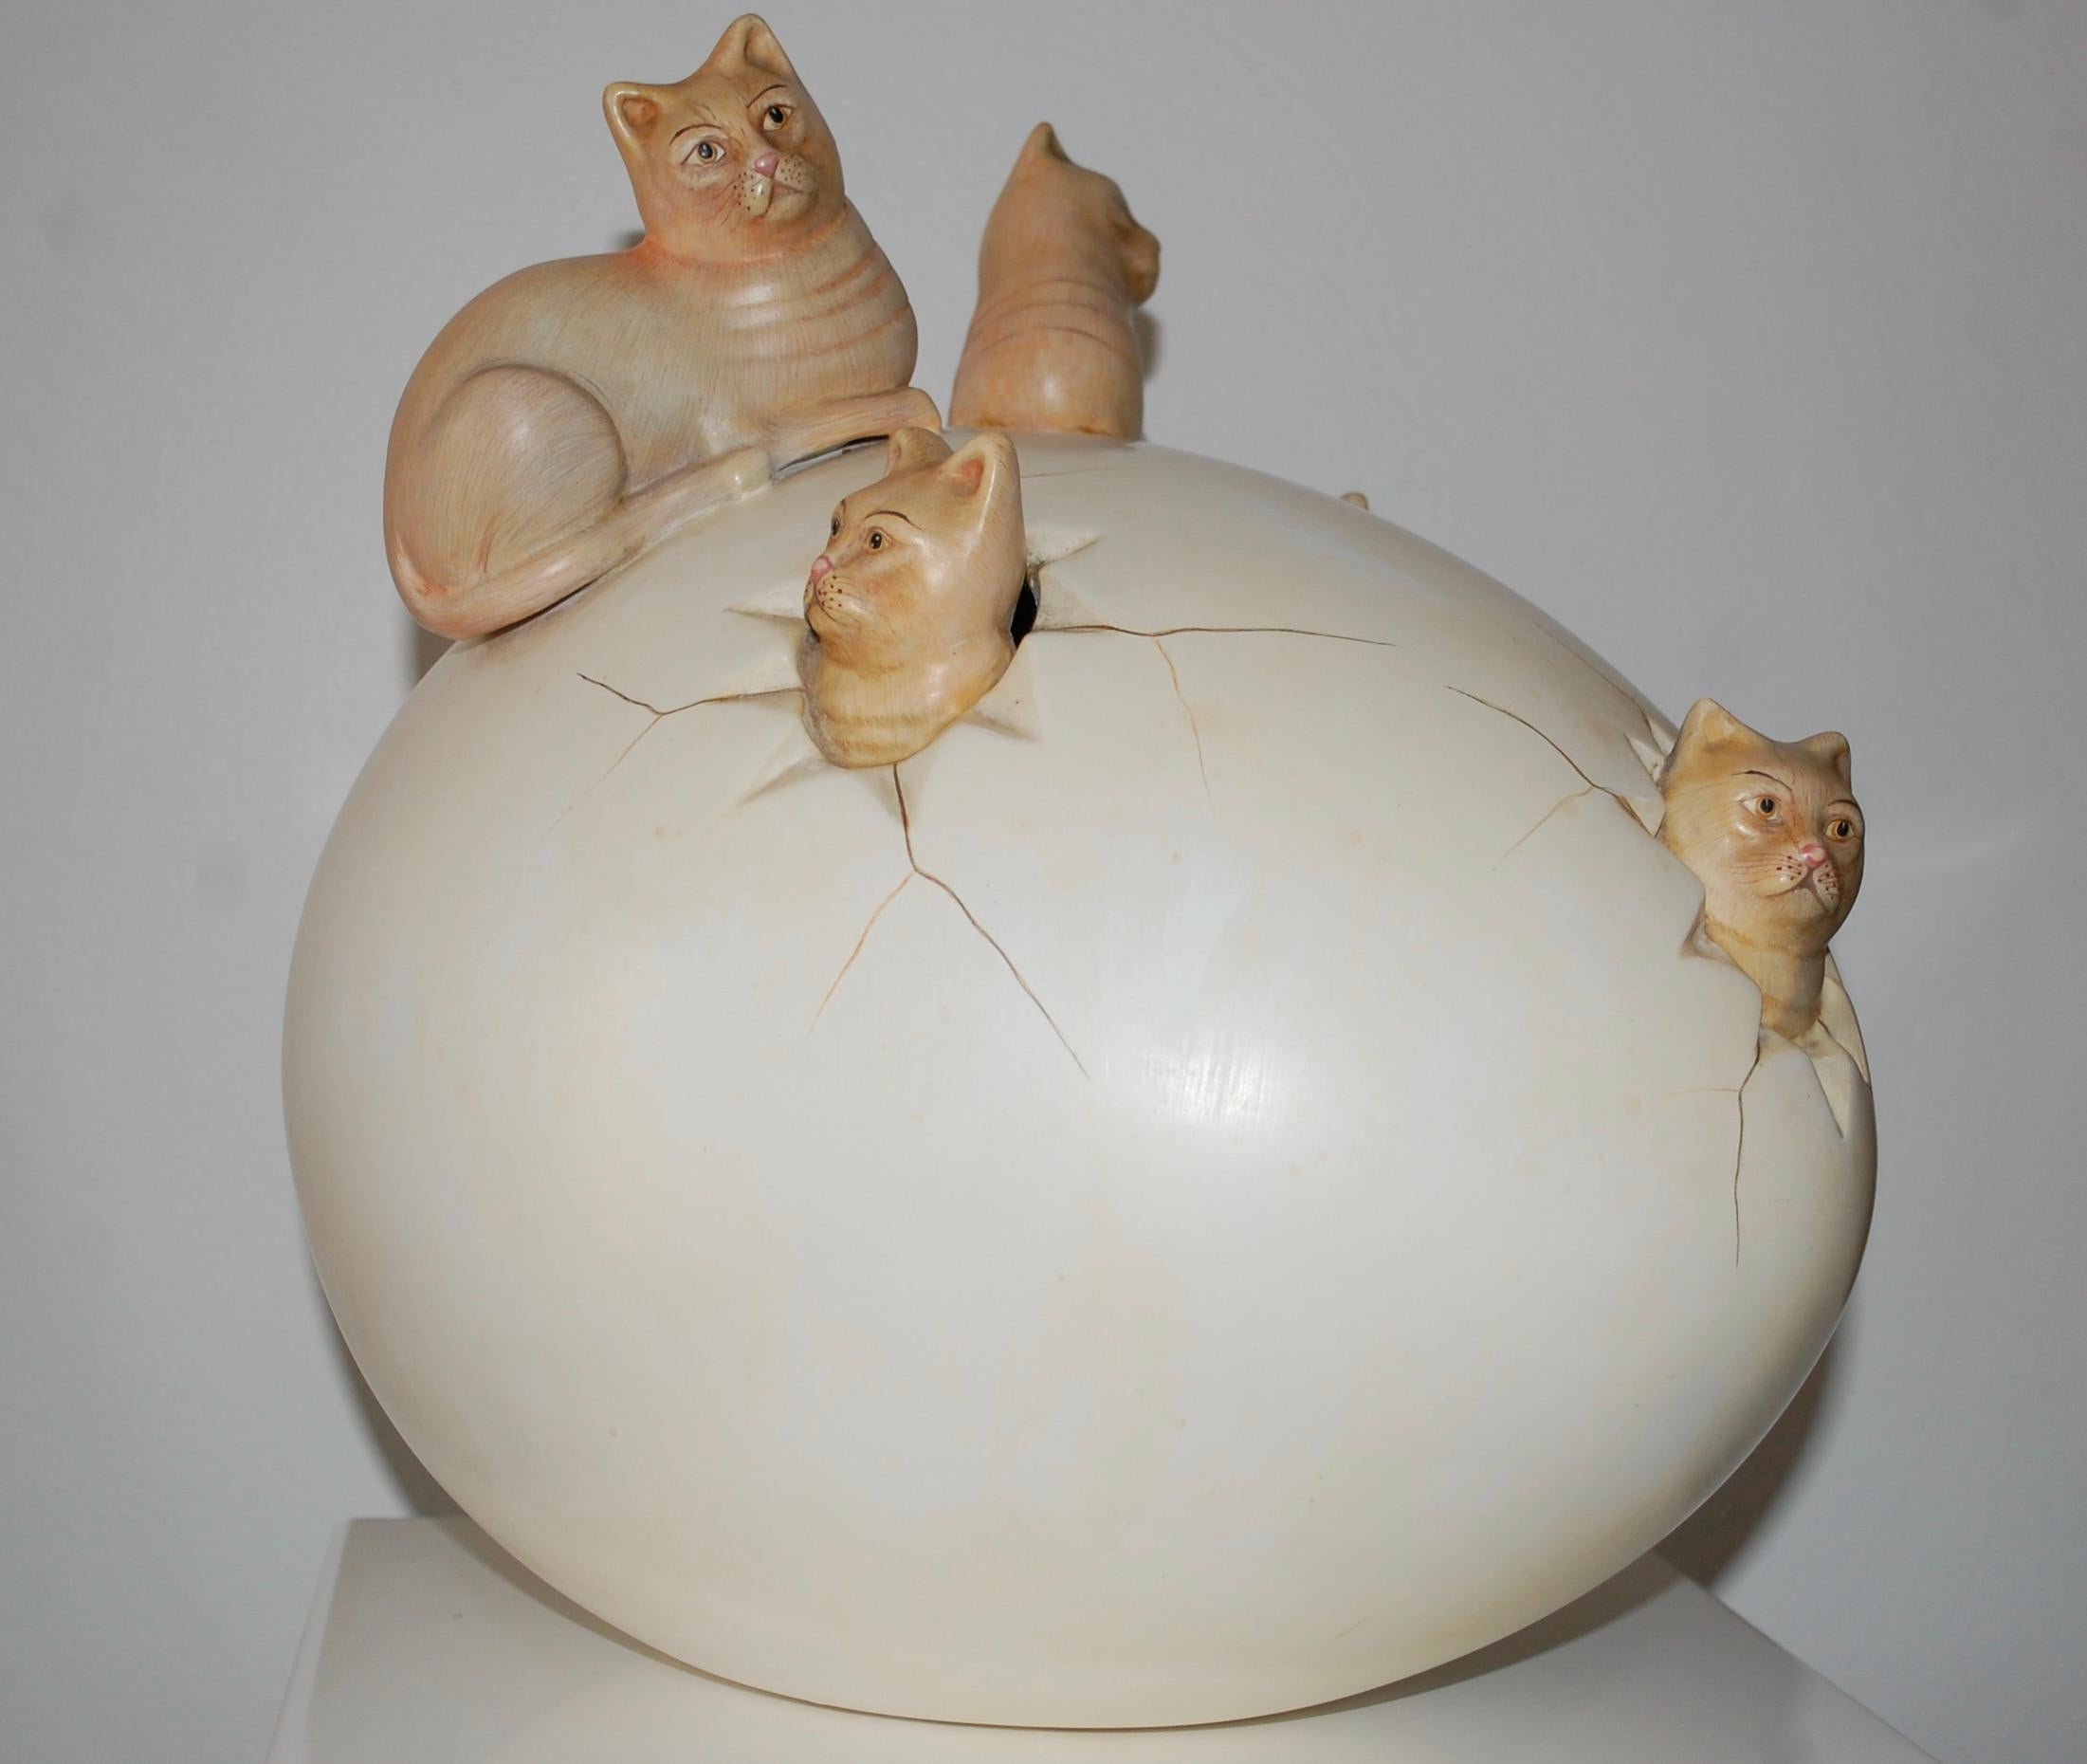  Cats Hatching From Egg Ceramic - Contemporary Sculpture by Sergio Bustamante